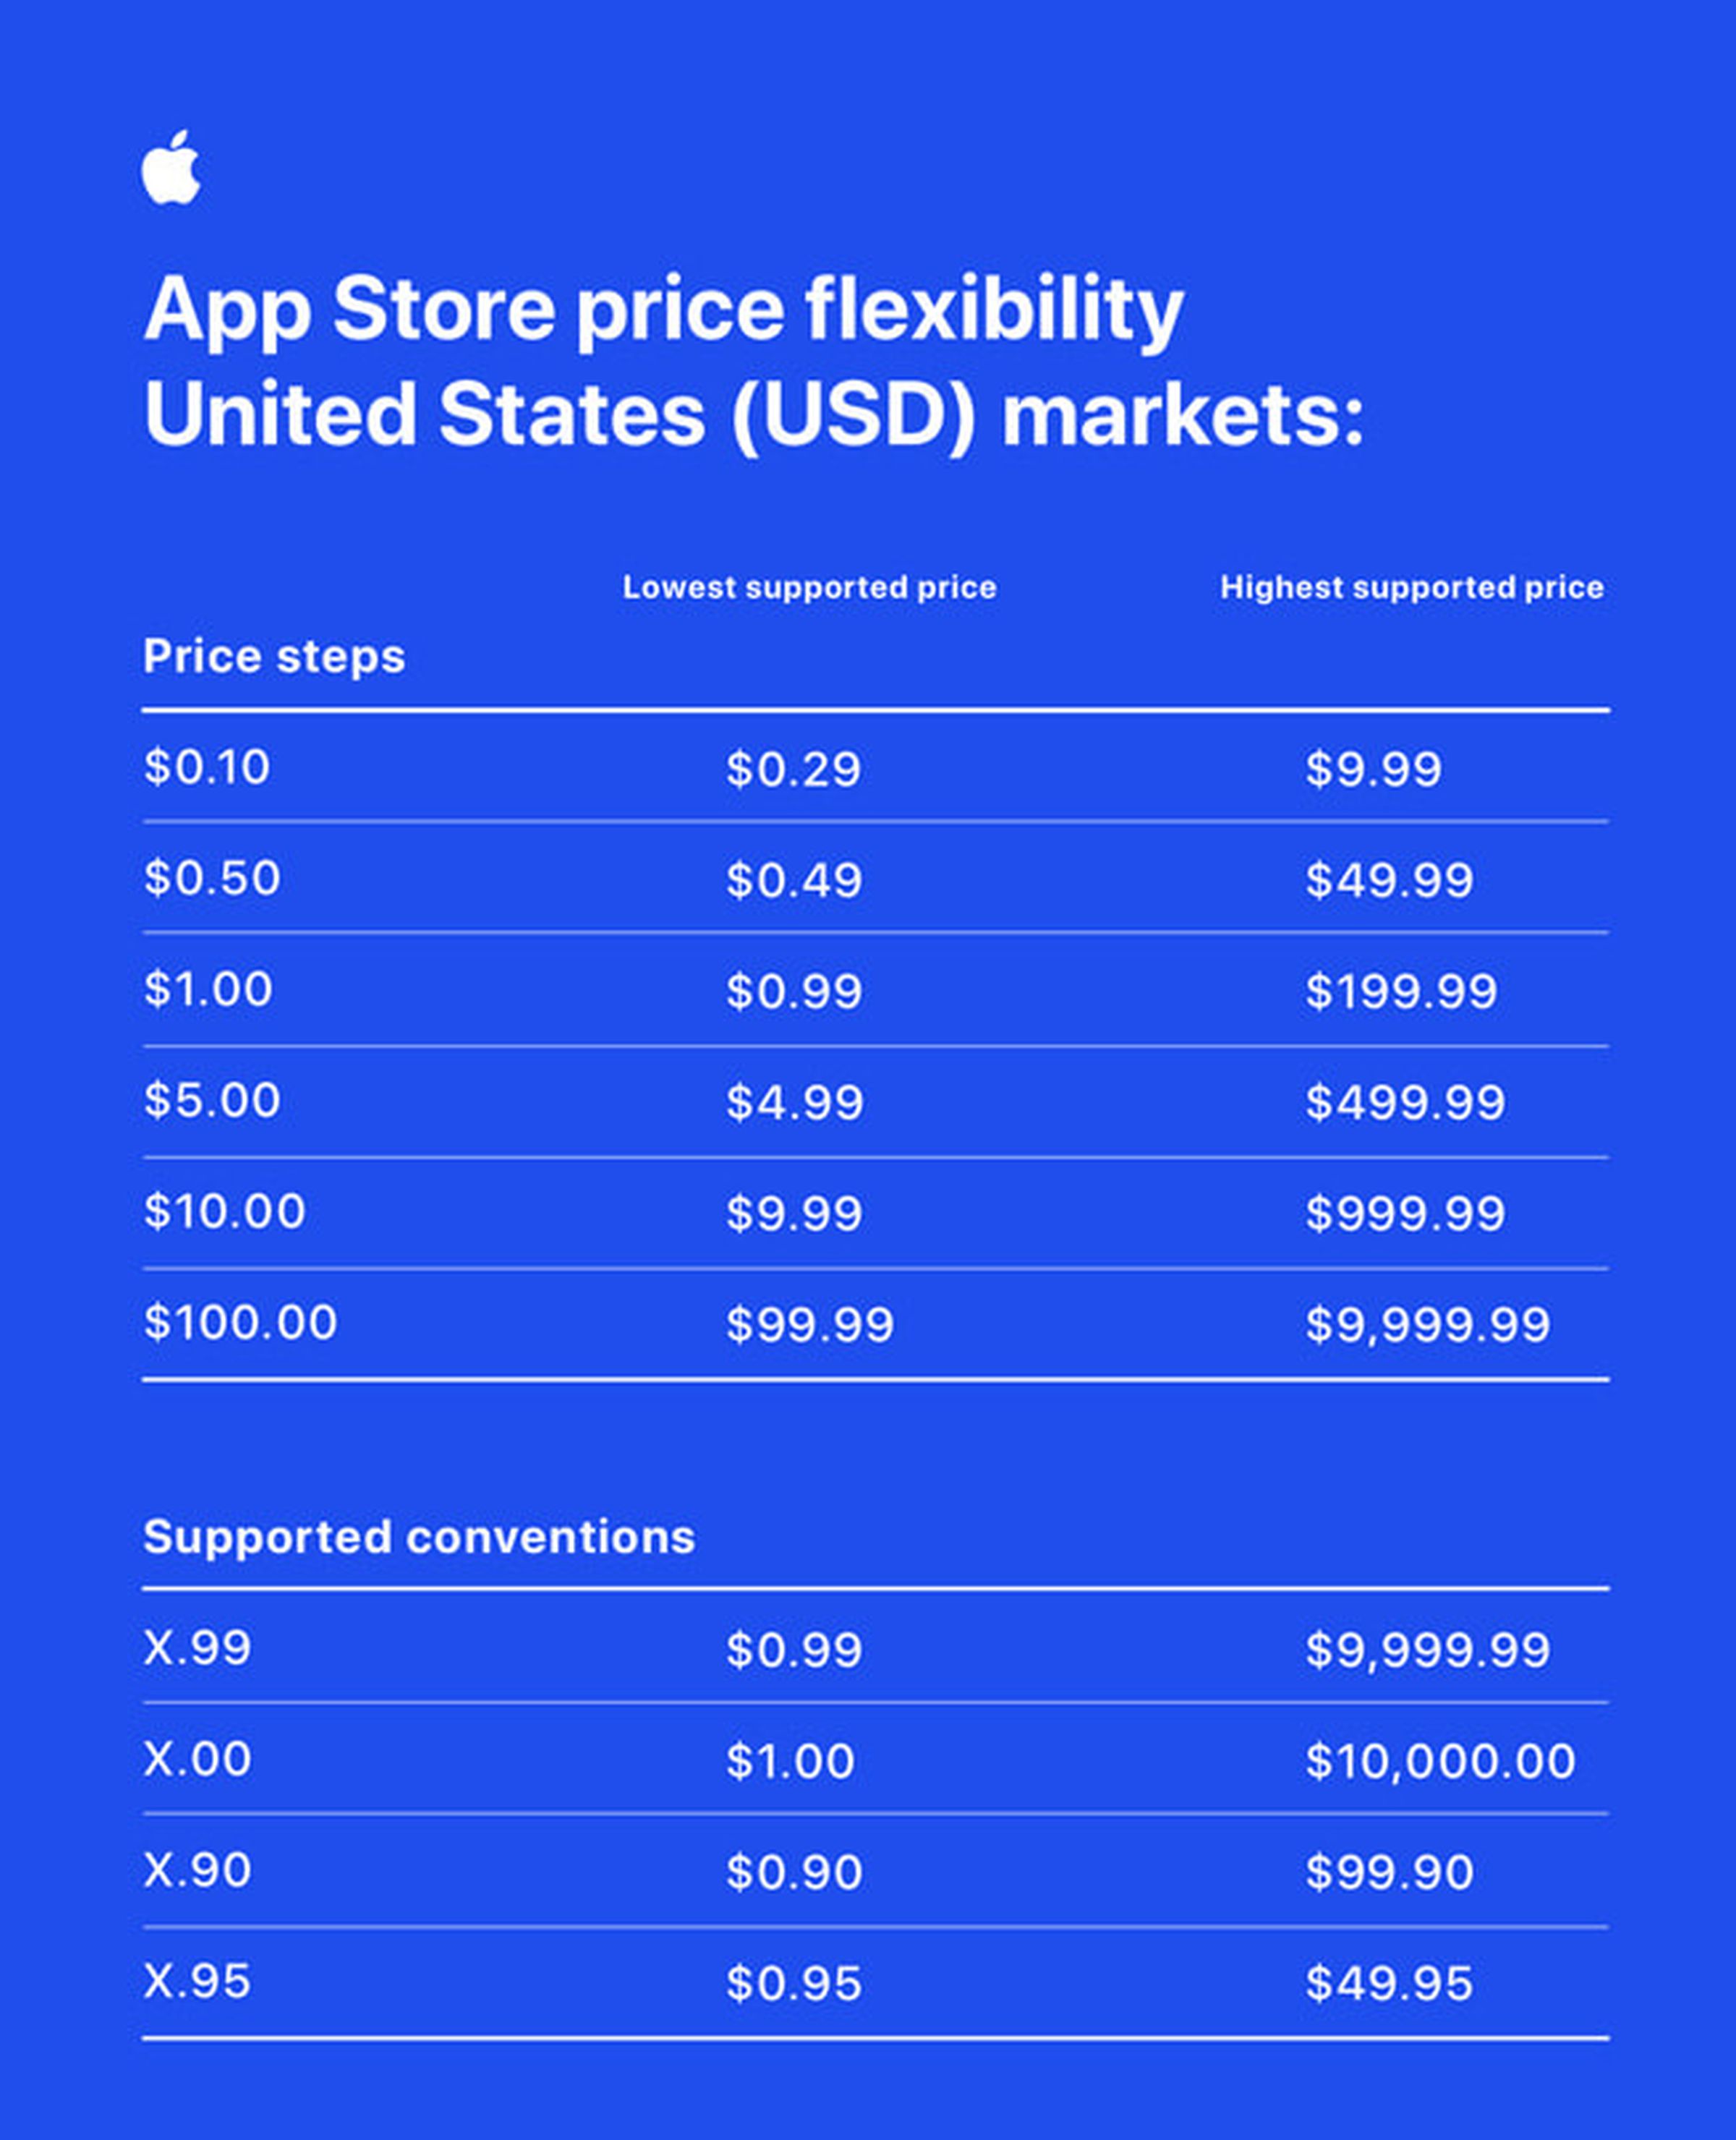 Chart showing price tiers for Apple’s App Store pricing, with the steps and supported conventions between $0.29 and $10.000.